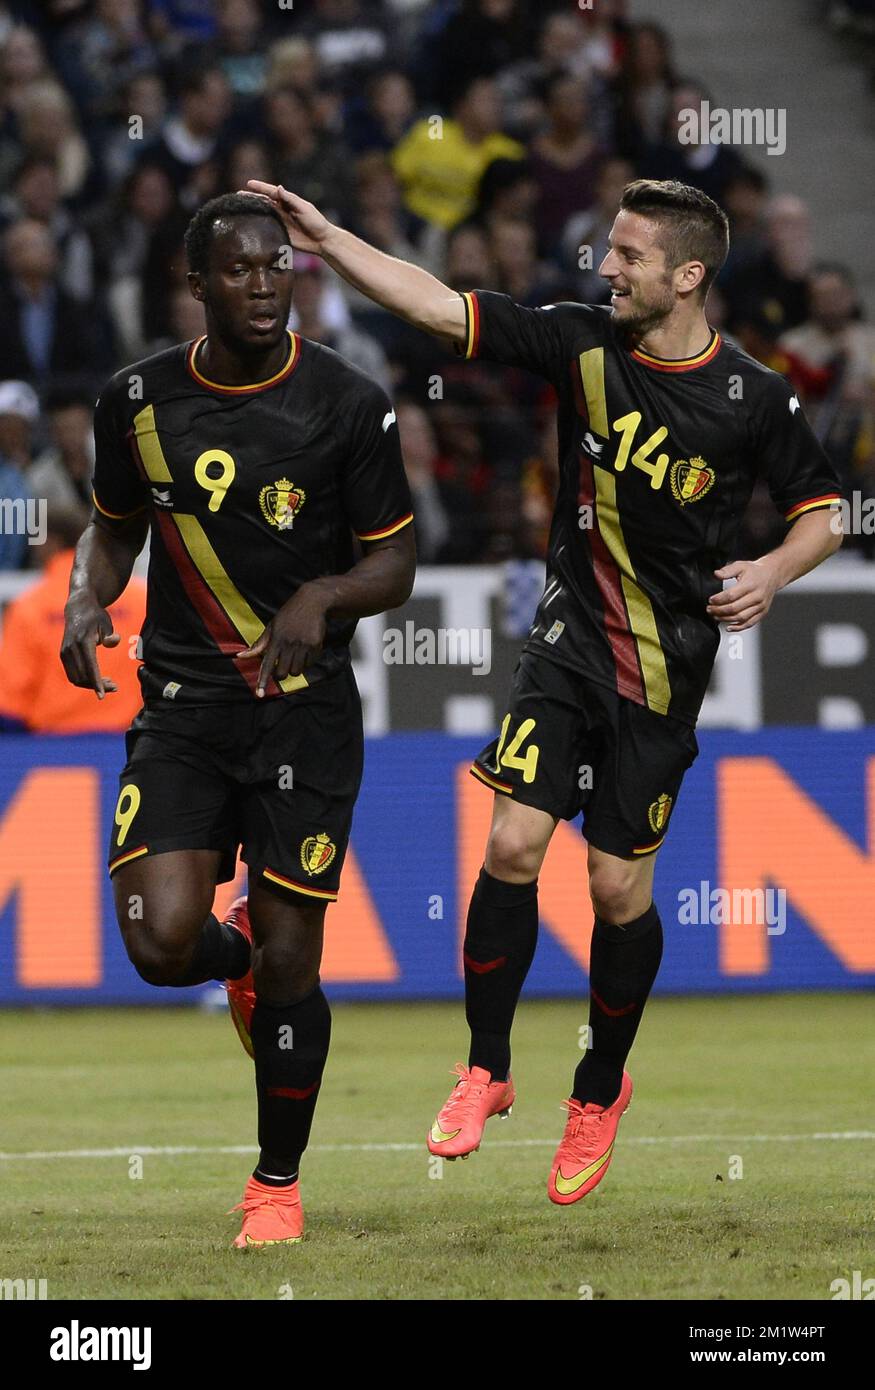 Belgium's Romelu Lukaku celebrates after scoring the 0-1 goal with Belgium's Dries Mertens at a friendly game between Belgian national soccer team Red Devils and the Swedish national soccer team in the Friends Arena, Sunday 01 June 2014, in Solna, Sweden. The Belgian Red Devils are preparing for the Brazil 2014 World Cup during a training camp in Sweden.  Stock Photo